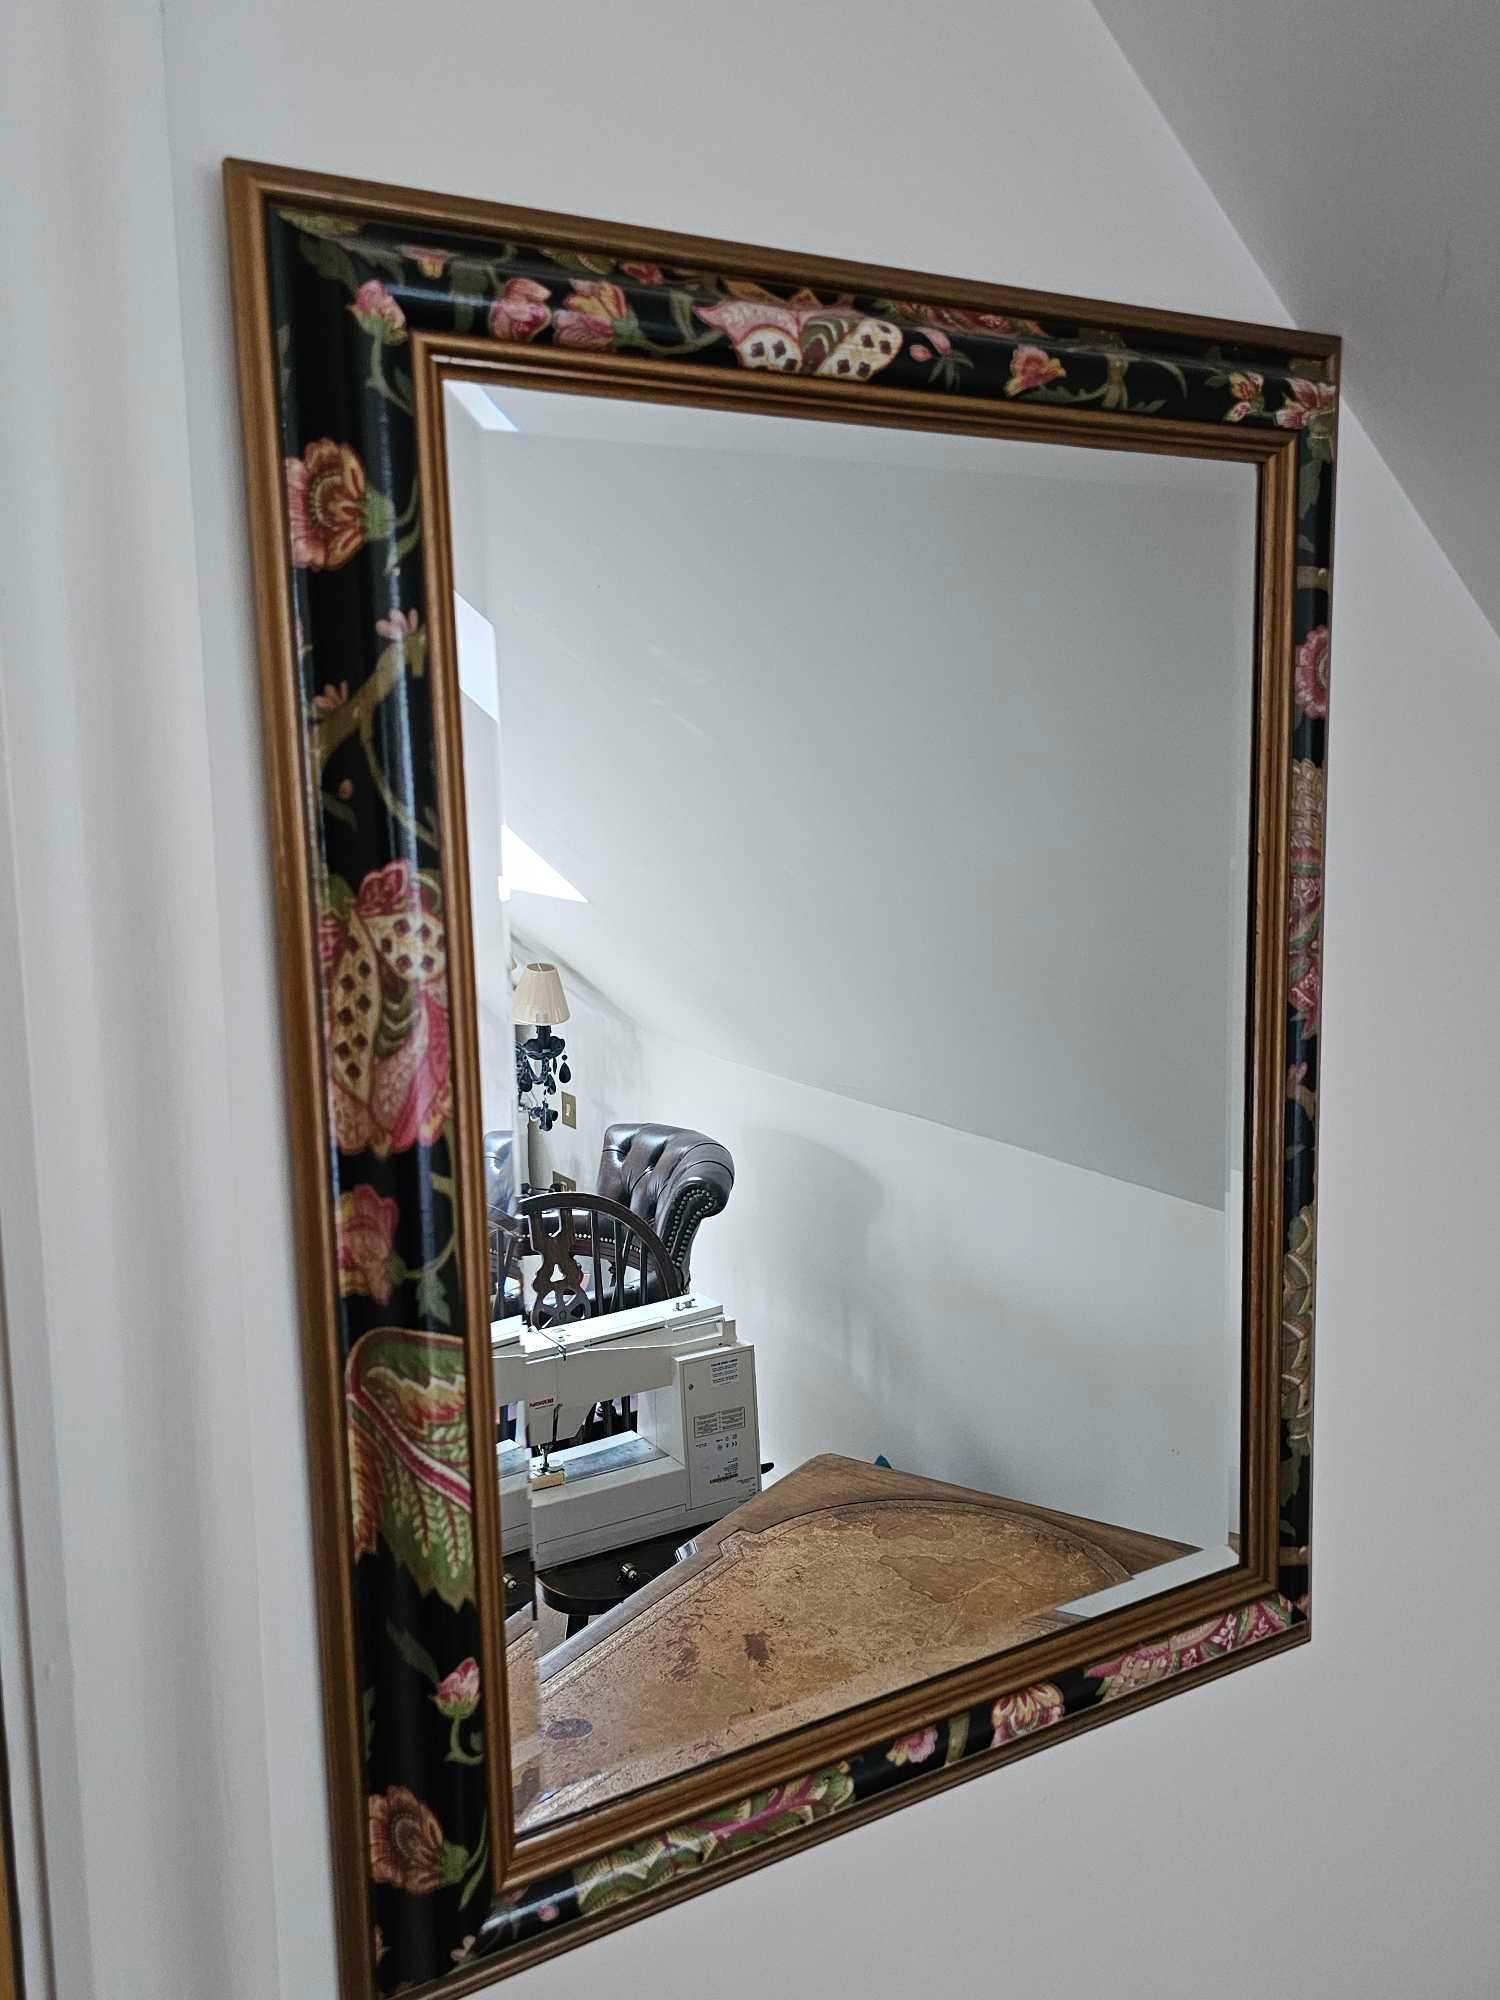 A Japanned Cushion Frame Bevelled Mirror 60 X 75cm - Image 2 of 3